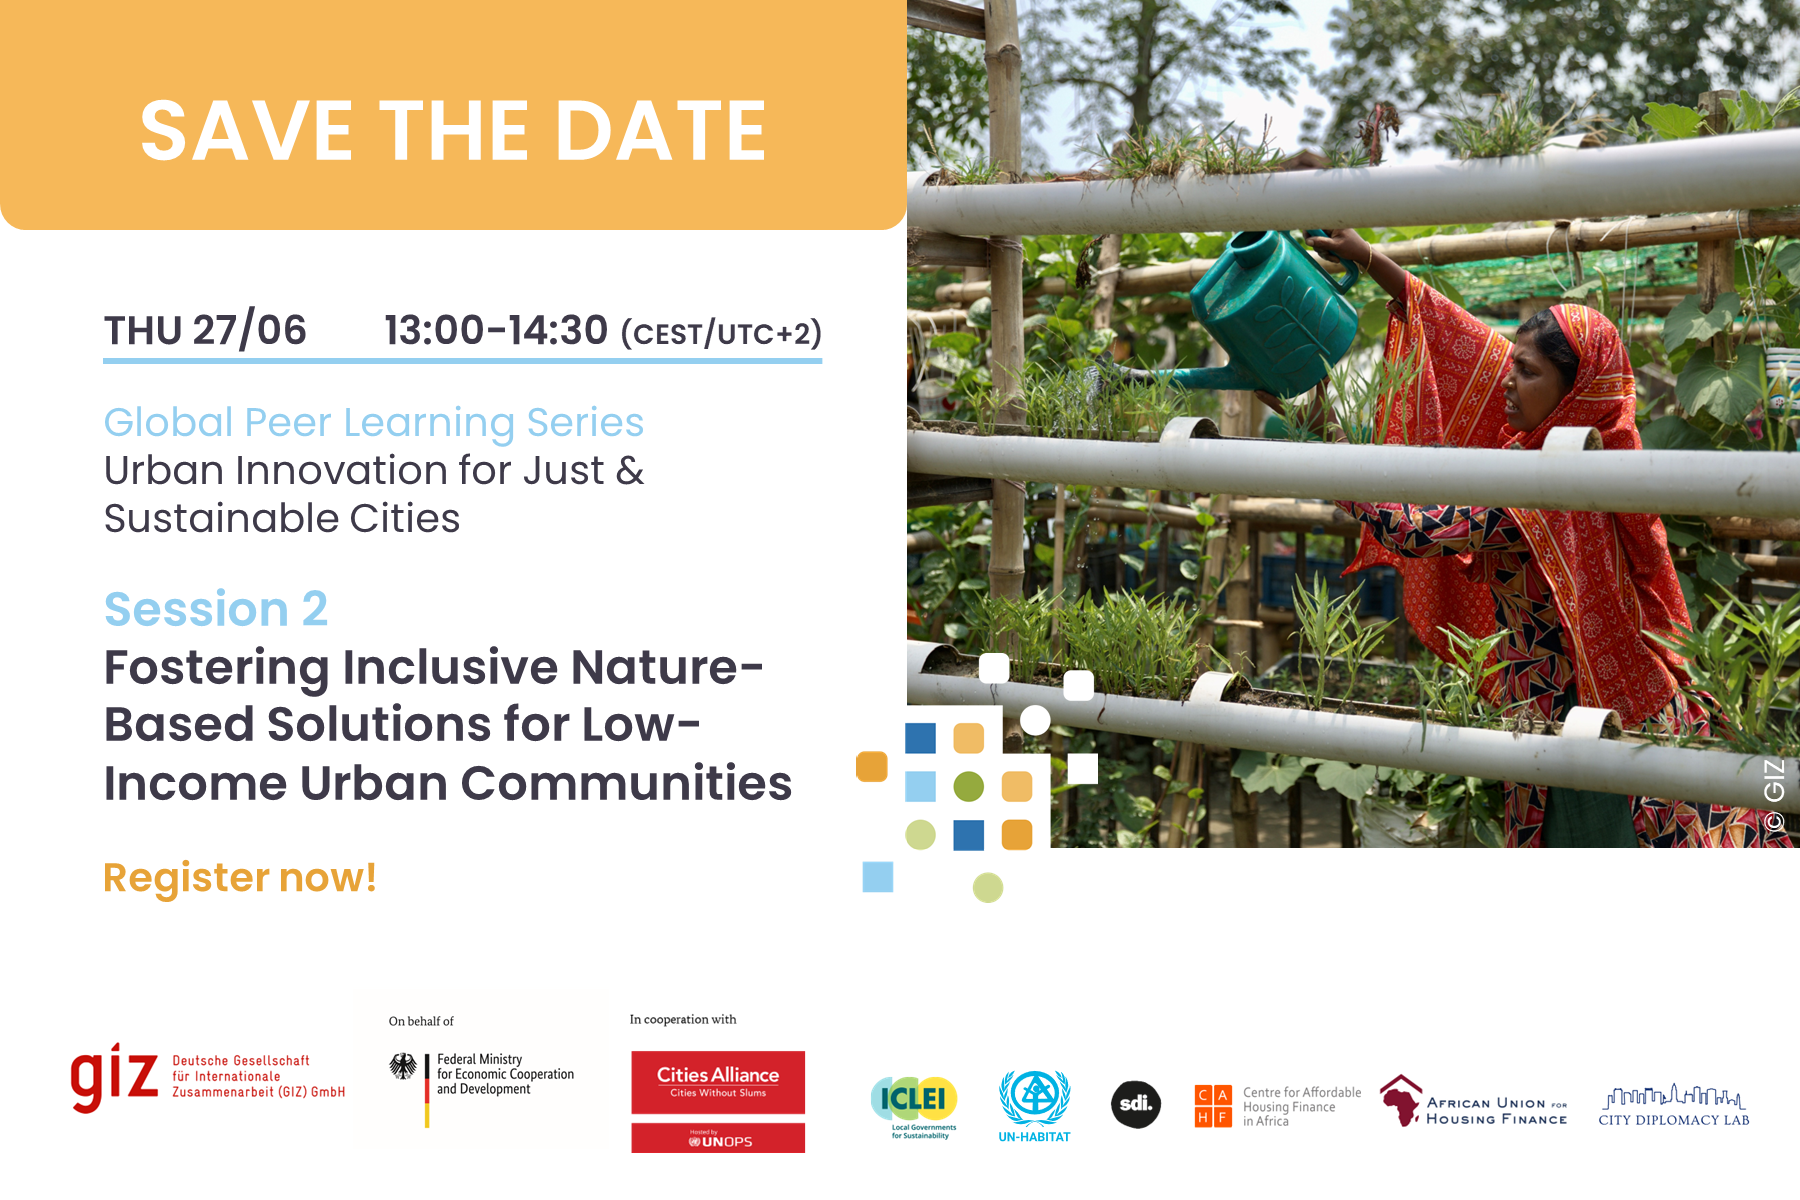 Fostering inclusive nature-based solutions in cities across the world